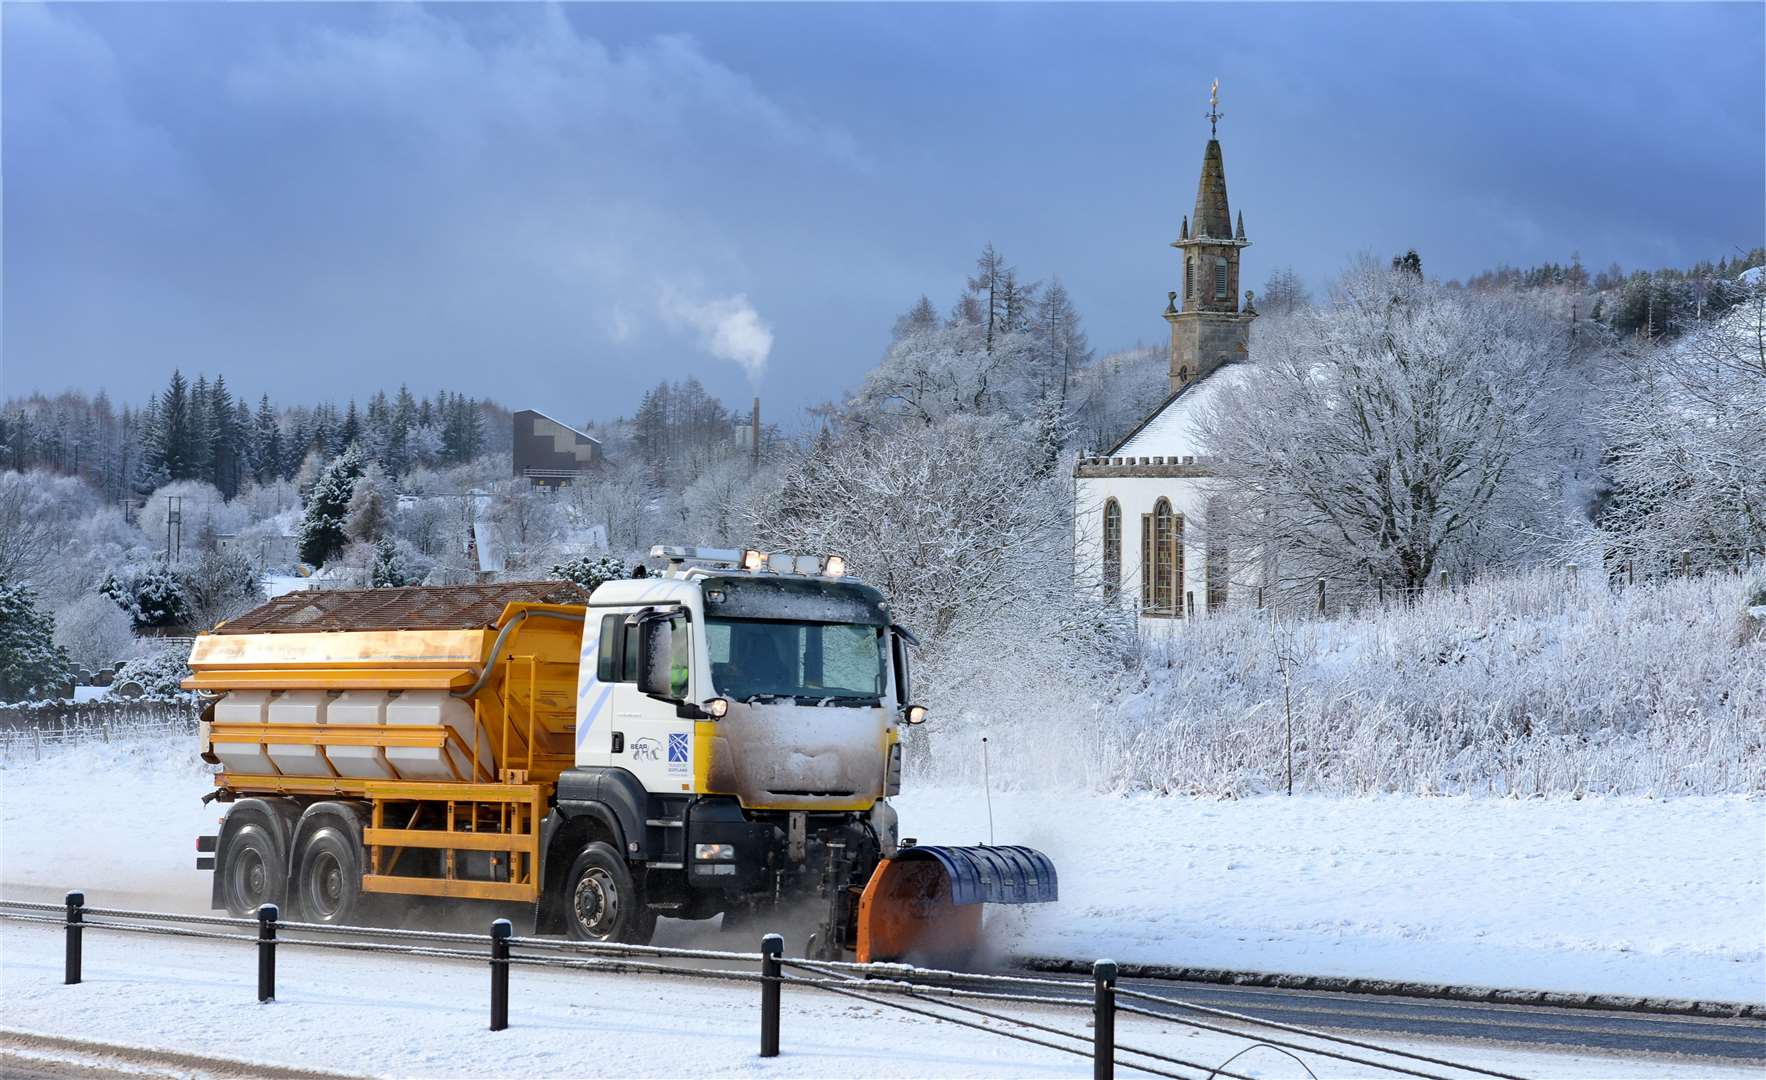 Snow ploughs could be out in force with up to 11 inches of snow forecast.